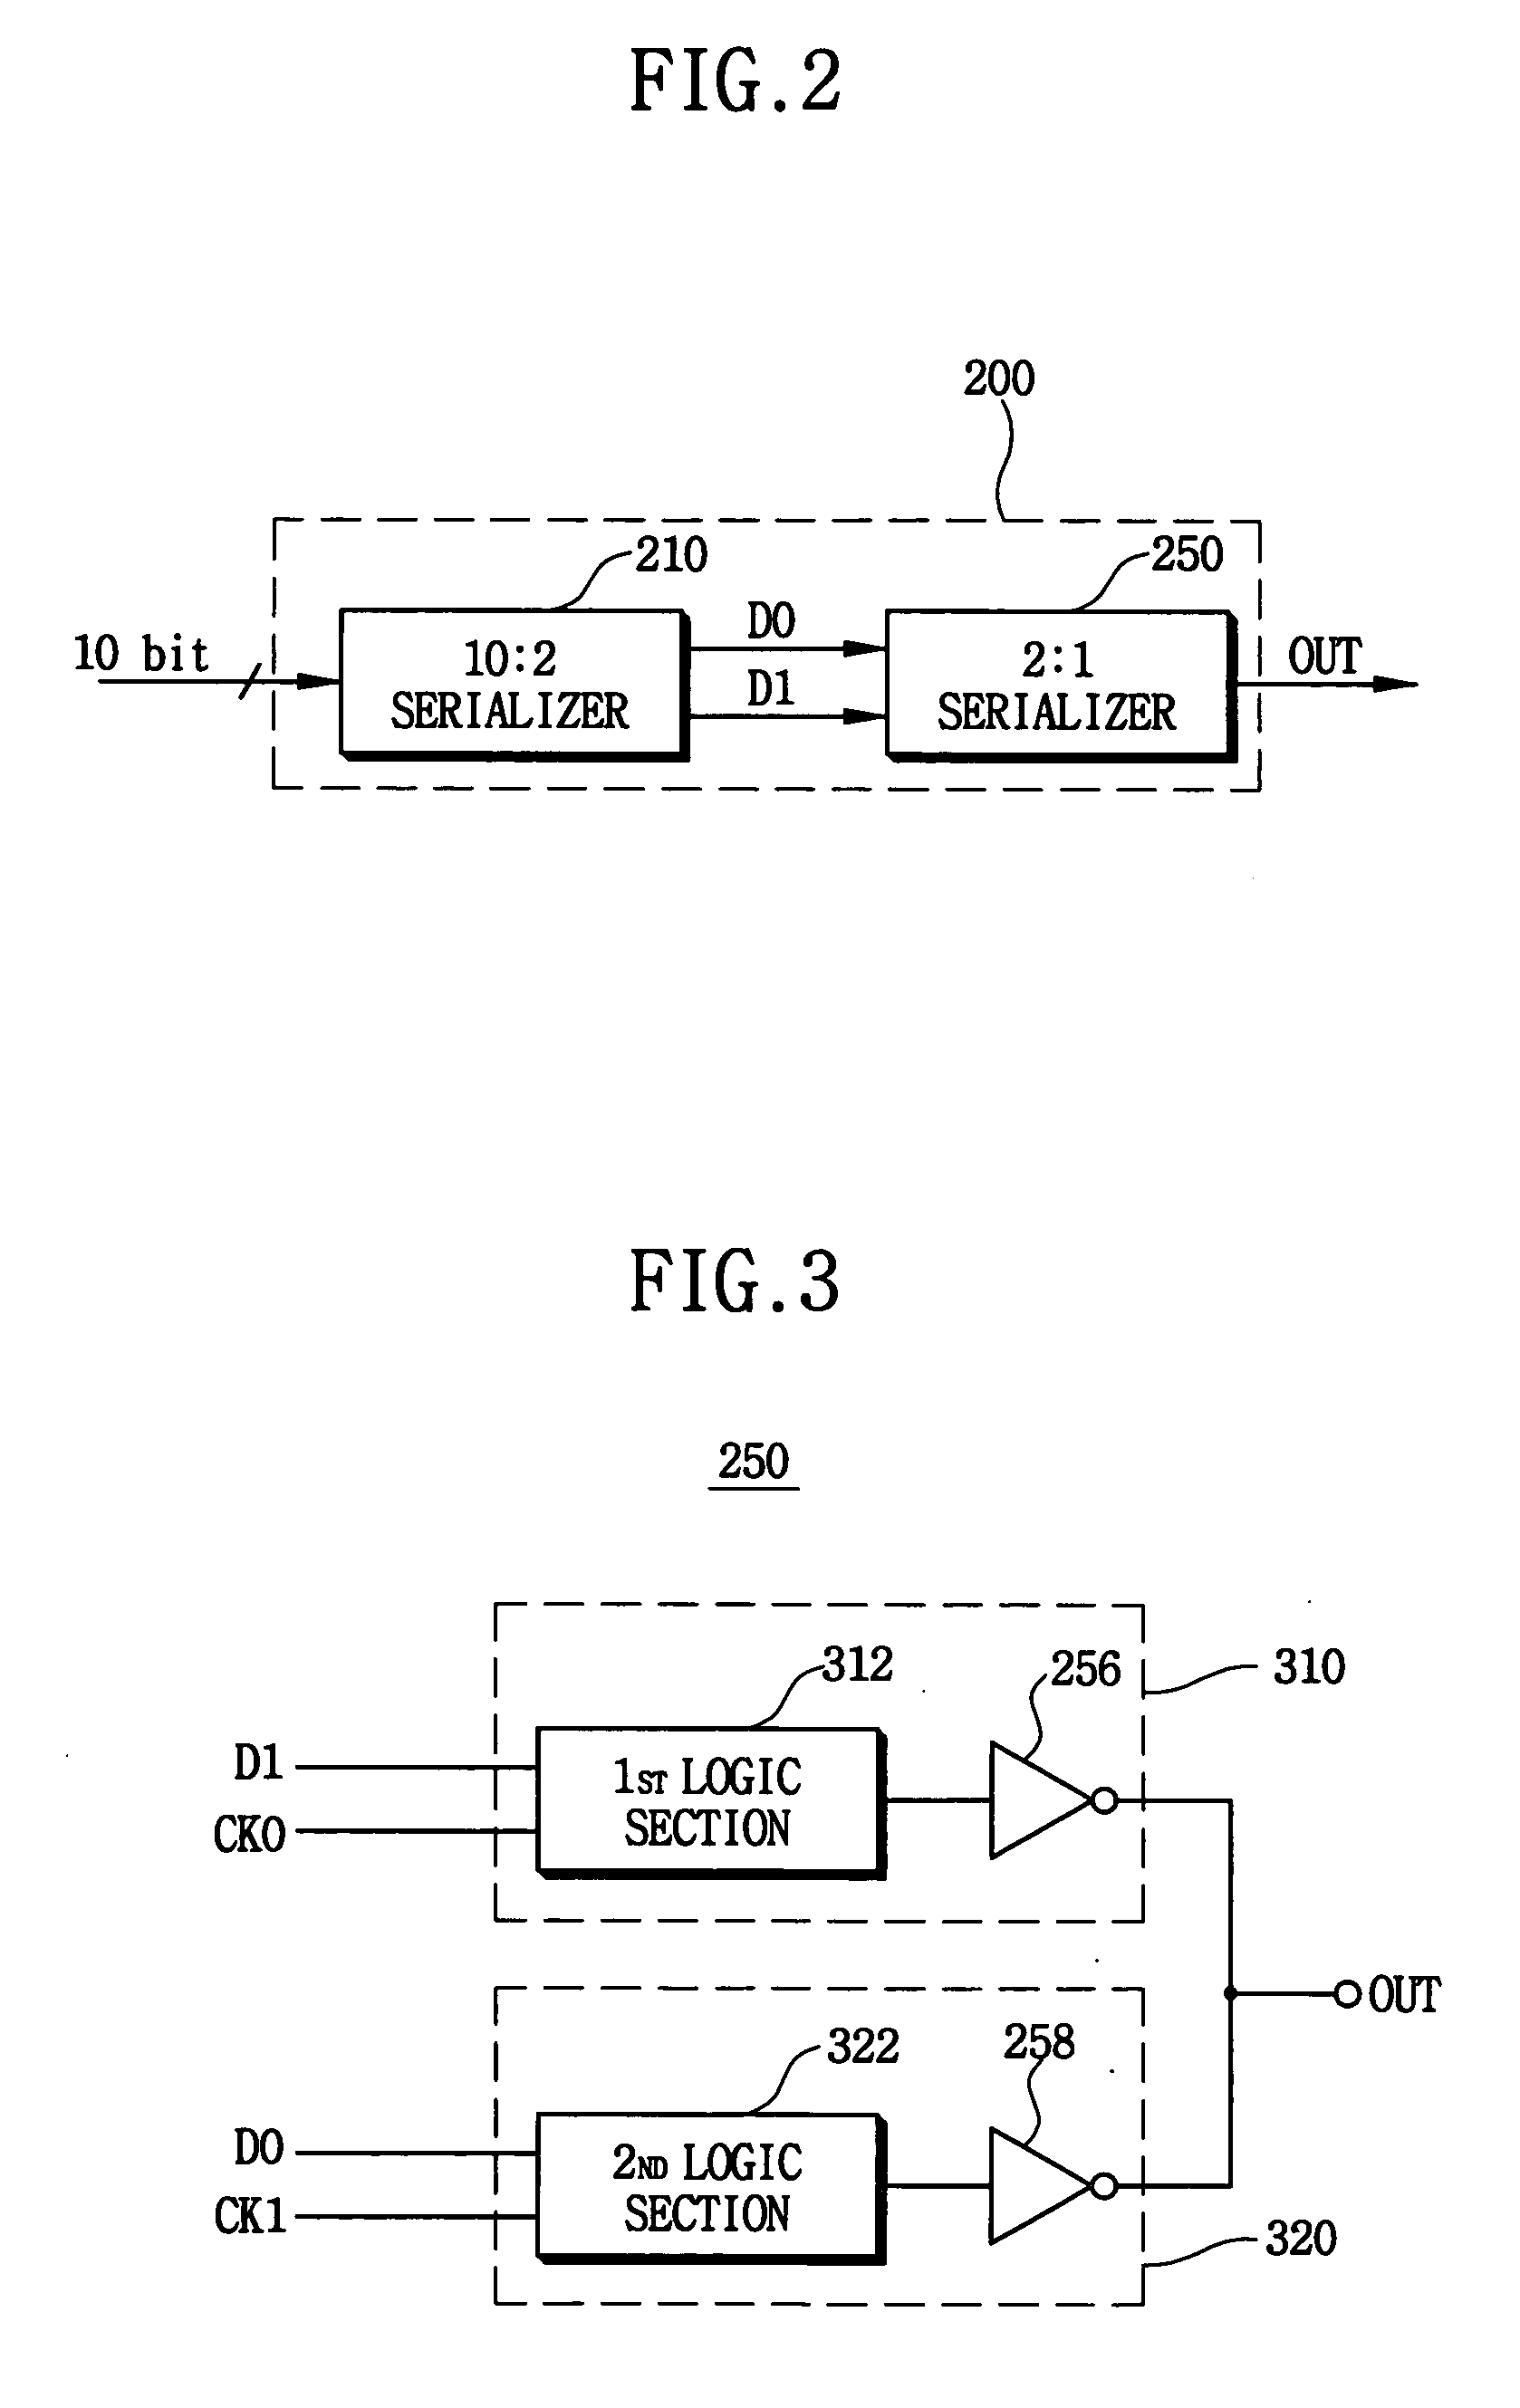 Serializer and method of serializing parallel data into serial data stream